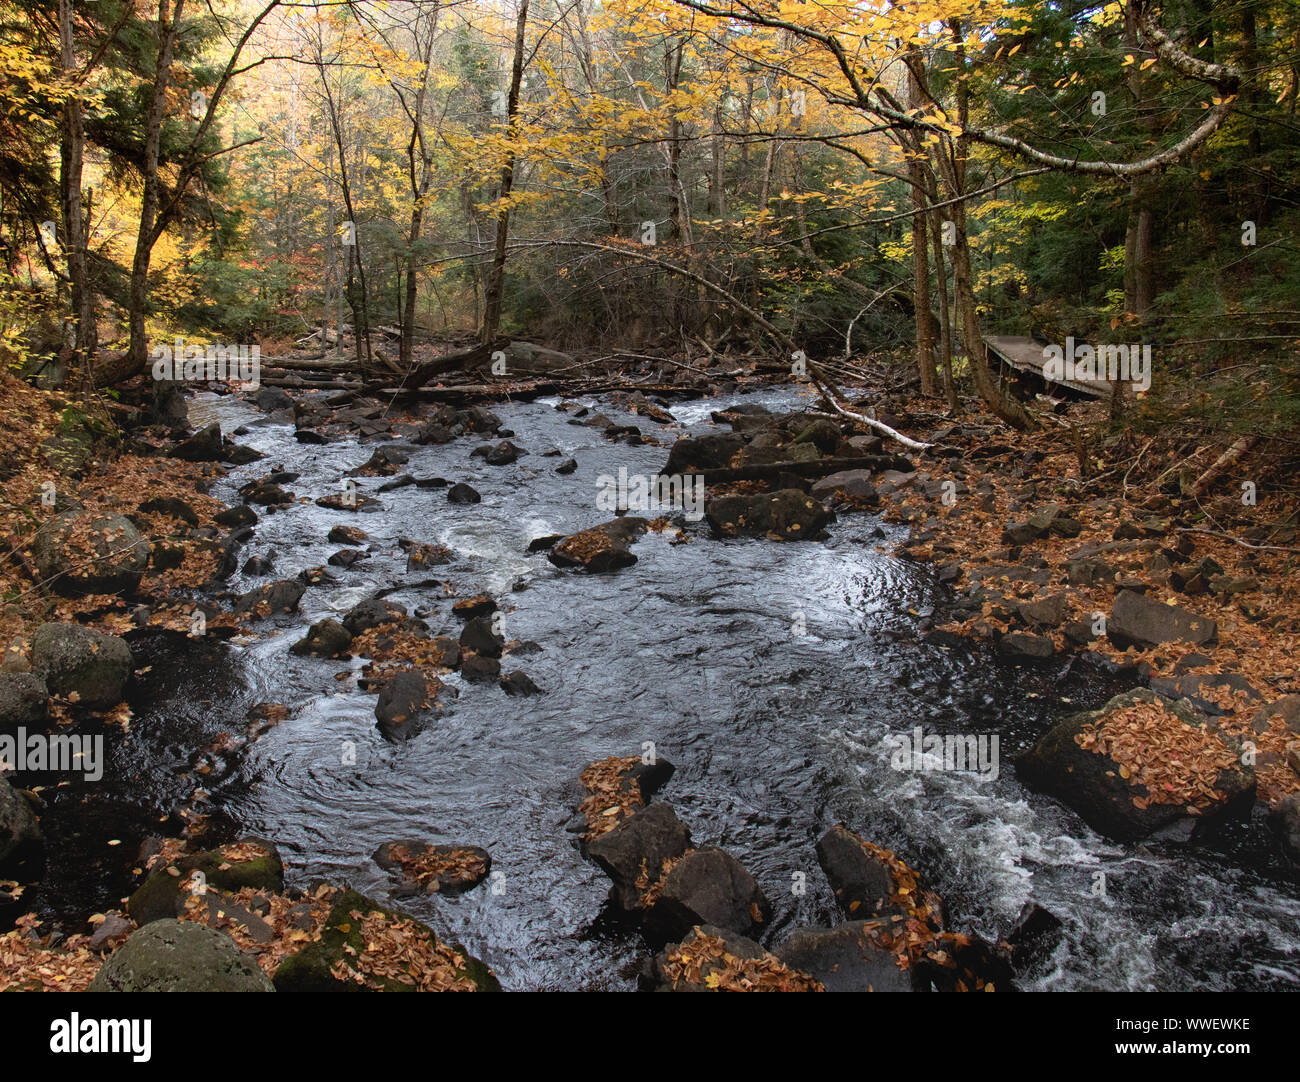 Beautiful autumn scene of a rocky river surrounded by forest in Algonquin Park Stock Photo